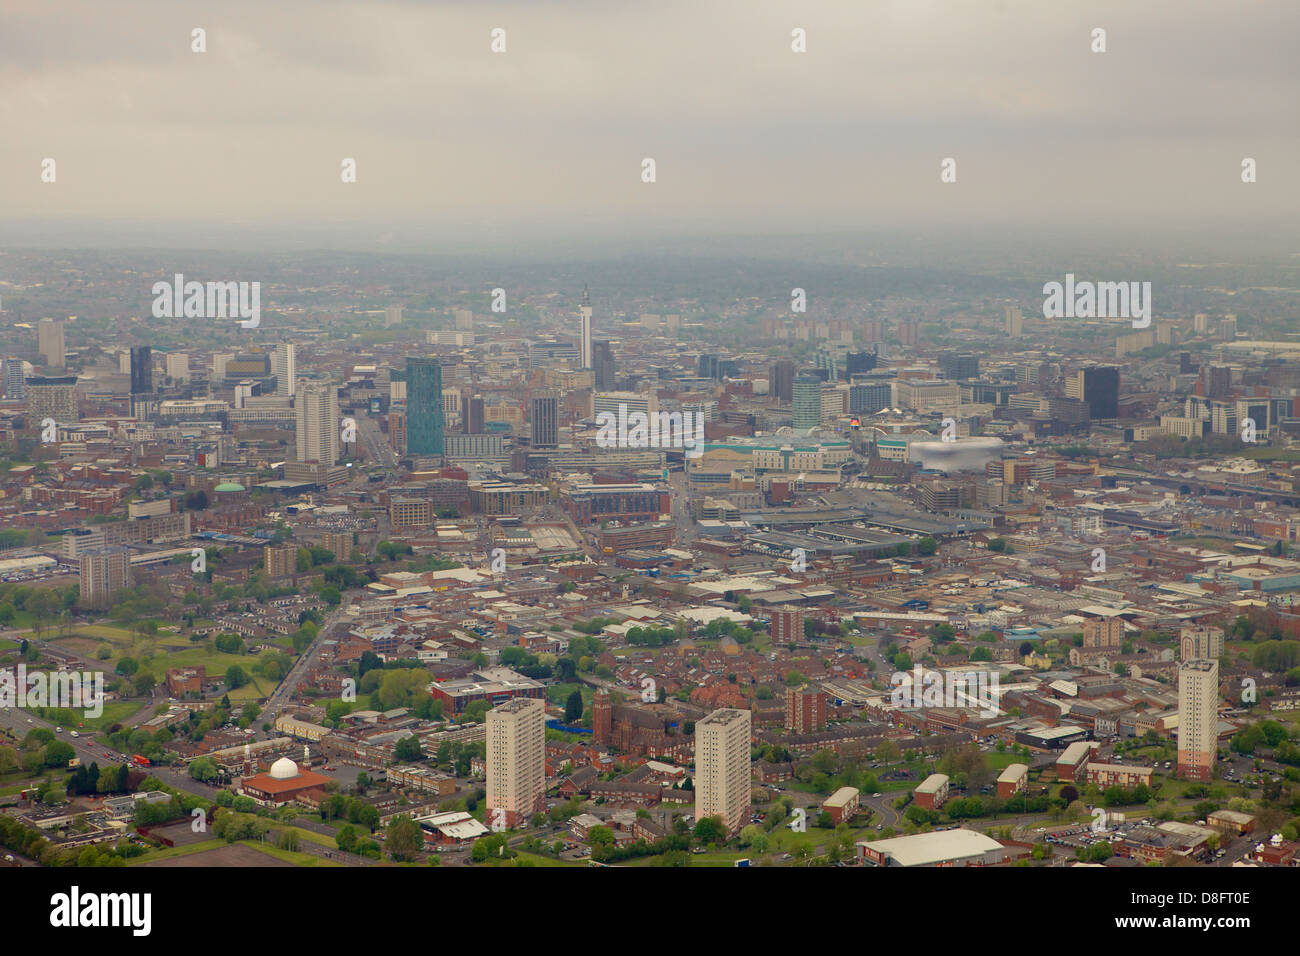 Aerial Photograph of Birmingham City Centre 2013 showing full cityscape Stock Photo